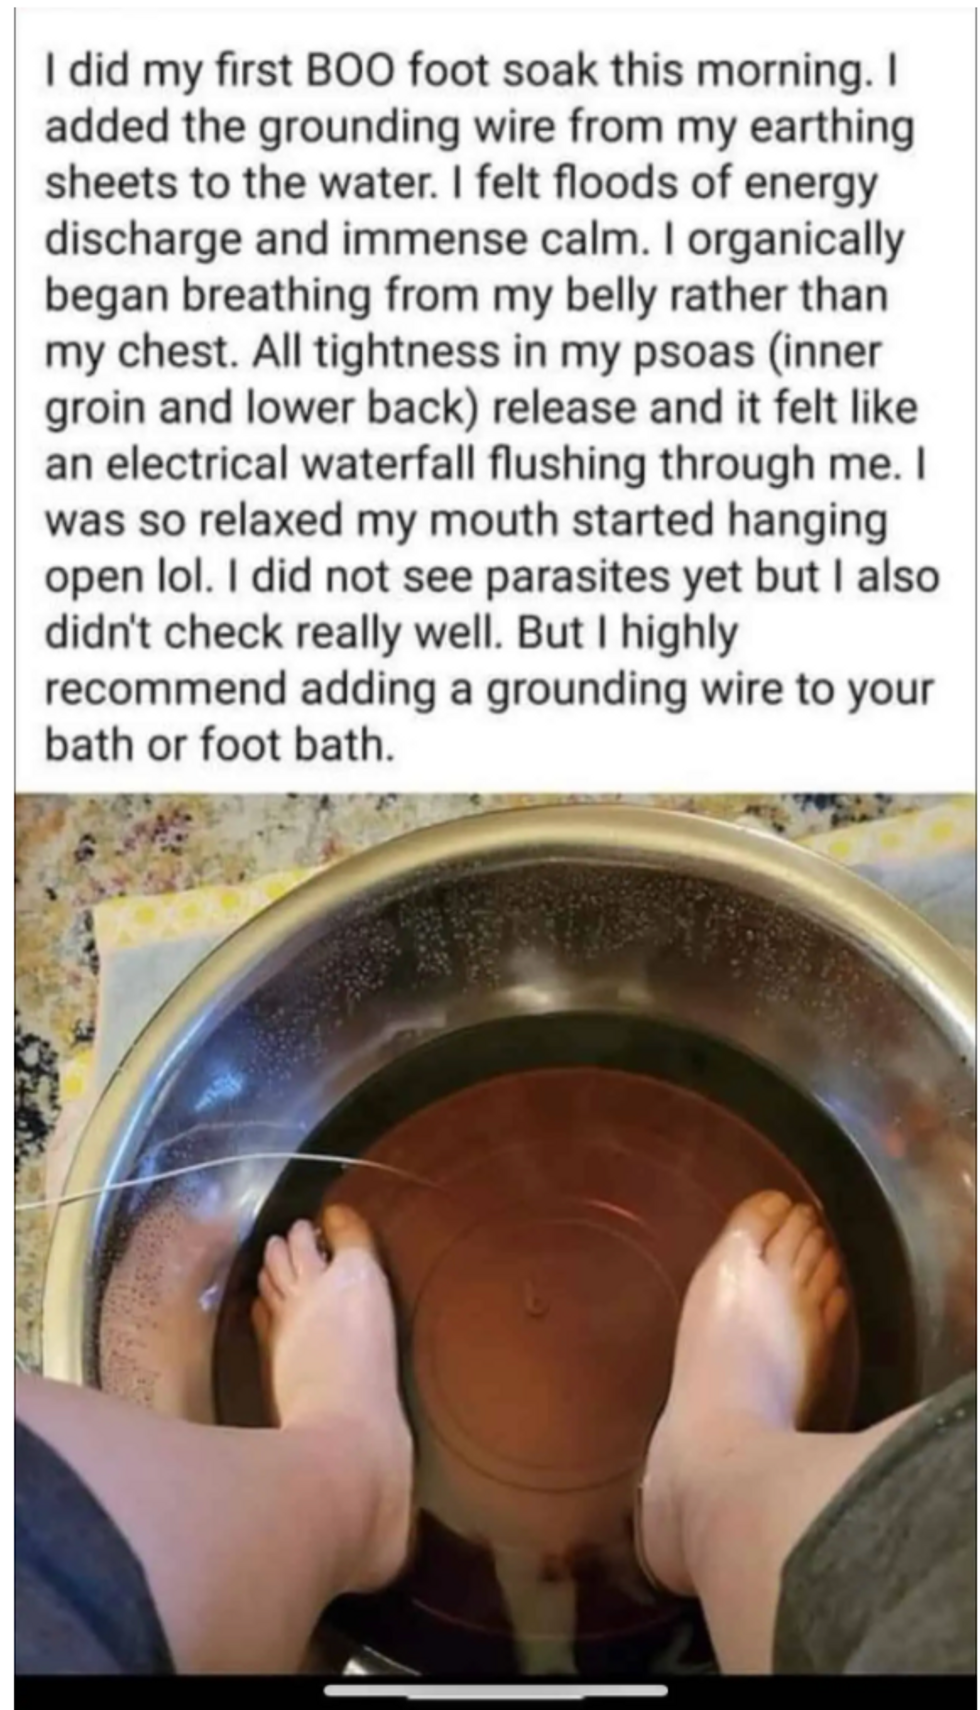 I did my first BOO foot soak this morning. I added the grounding wire from my earthing sheets to the water. I felt floods of energy discharge and immense calm. I organically began breathing from my belly rather than my chest. All tightness in my psoas (inner groin and lower back) release and it felt like an electrical waterfall flushing through me. I was so relaxed my mouth started hanging open lol. I did not see parasites yet but I also didn\u2019t check really well. But I highly recommend adding a grounding wire to your bath or foot bath. 